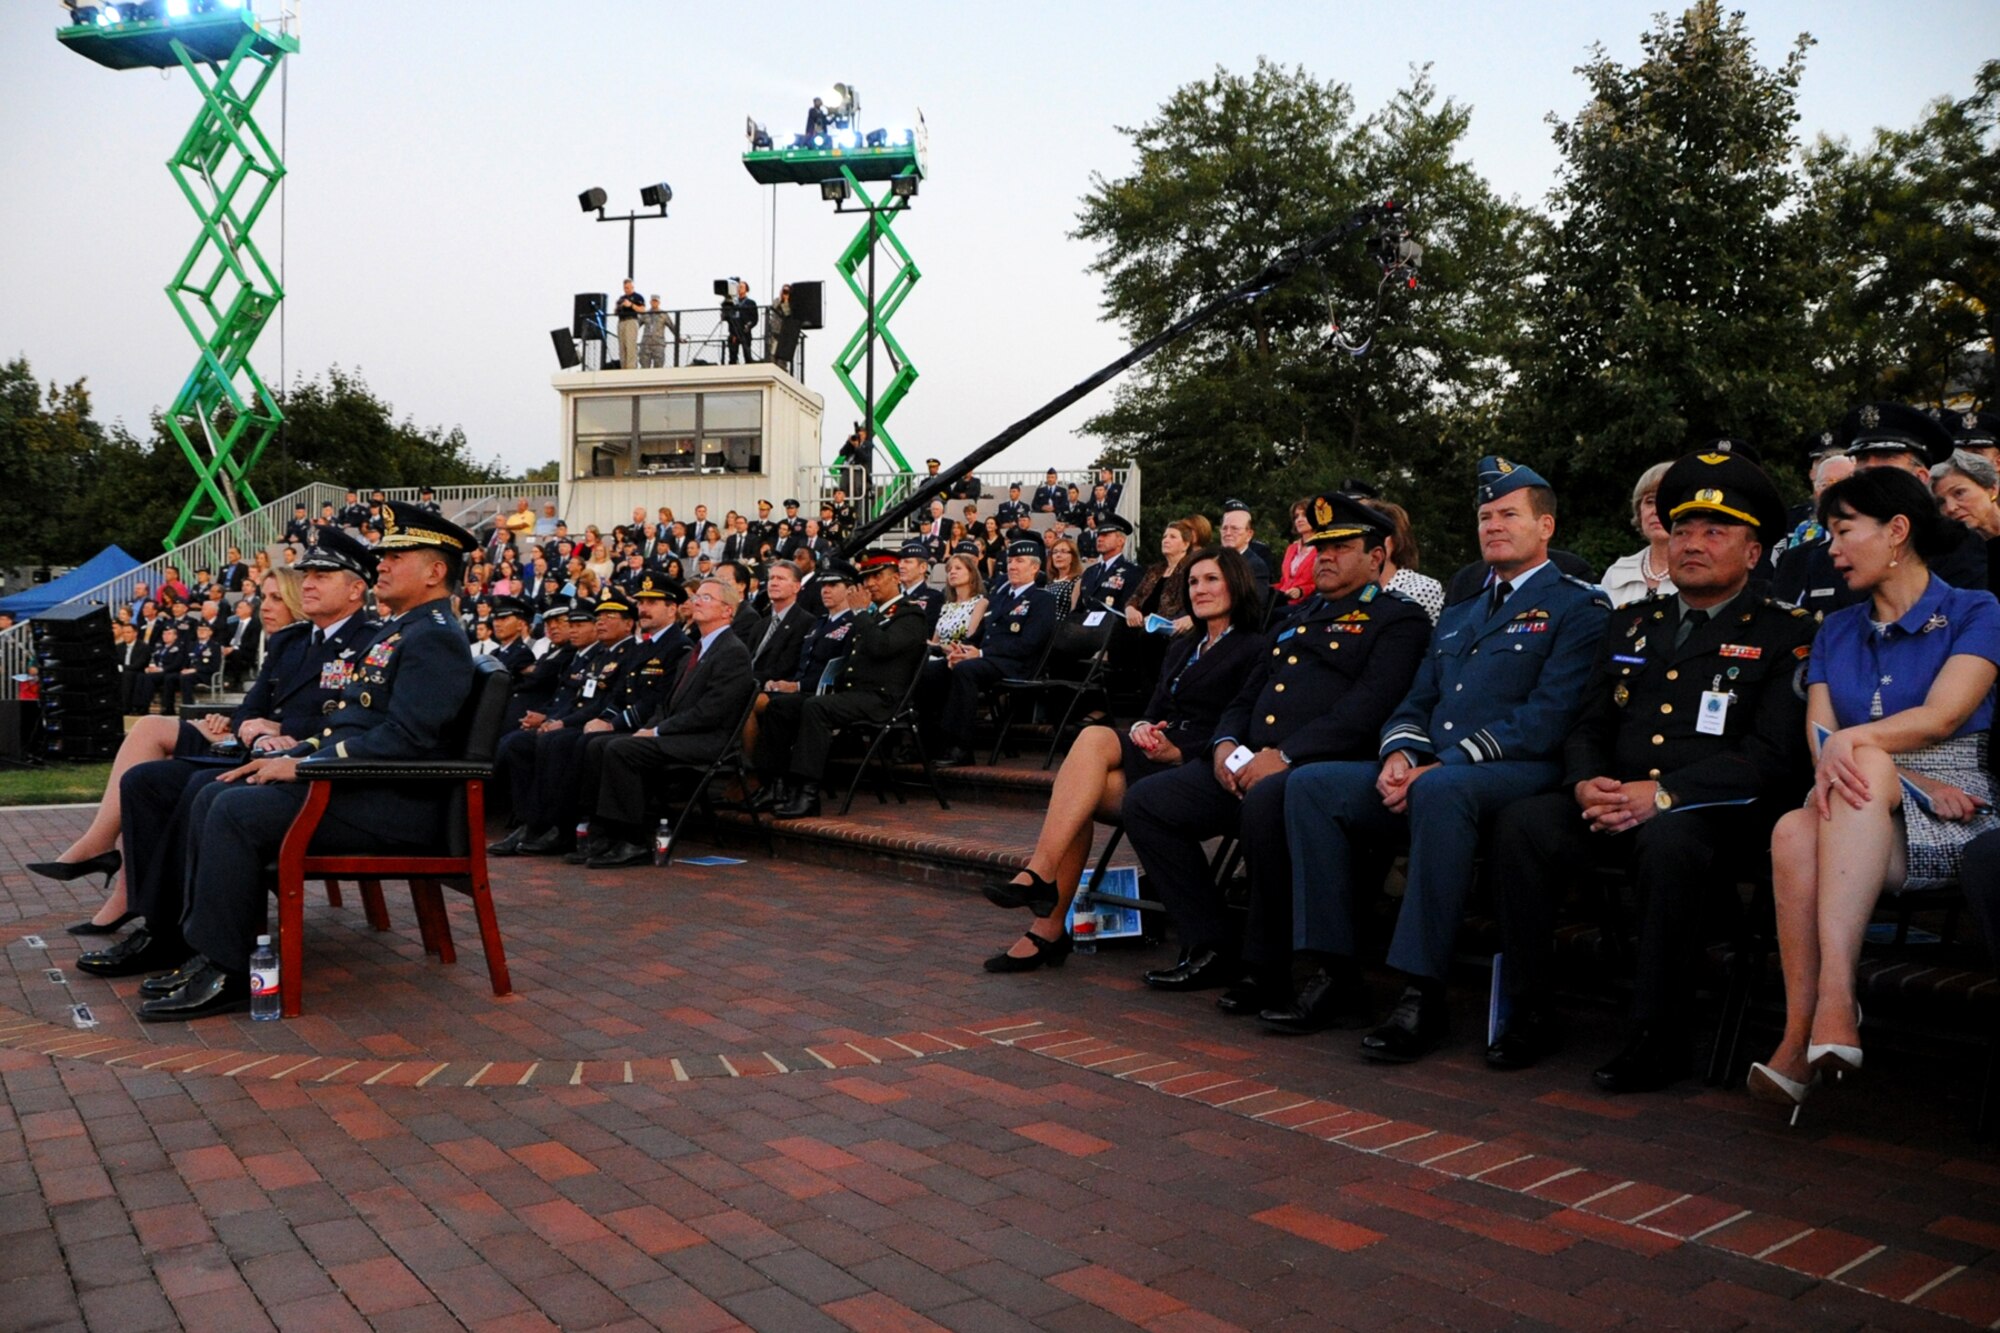 Secretary of the Air Force Deborah Lee James, Air Force Chief of Staff, Gen. Mark A. Welsh III, and leaders of Air Forces from the Pacific region observe the United States Air Force Tattoo Sept. 17, 2015. The Air Force District of Washington commemorated the United States Air Force's 68th birthday with a celebration of music, drill and ceremony, aircraft, and fireworks on the Air Force Ceremonial Lawn at Joint Base Anacostia-Bolling. The event featured flyovers of several aircraft including the Air Force Thunderbirds and a Warbird vintage aircraft squadron, as well as performances by the Air Force Band and Honor Guard. (U.S. Air Force photo/Staff Sgt. Matt Davis)